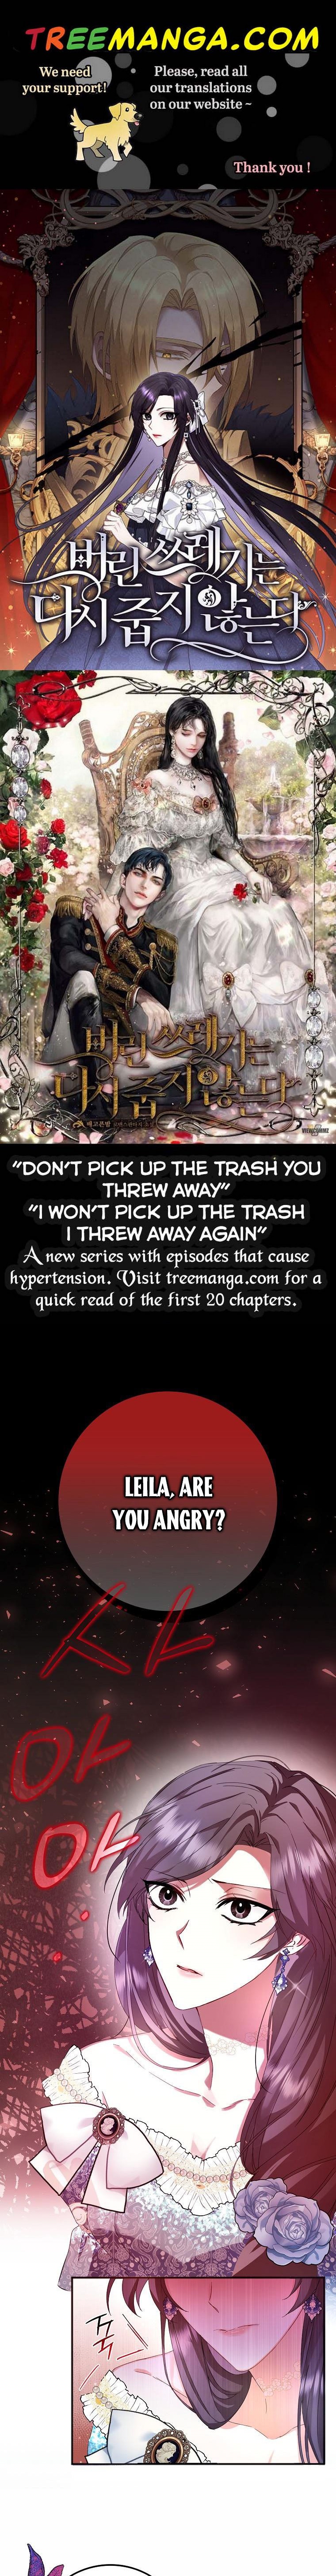 Don’T Pick Up What You’Ve Thrown Away - Page 1